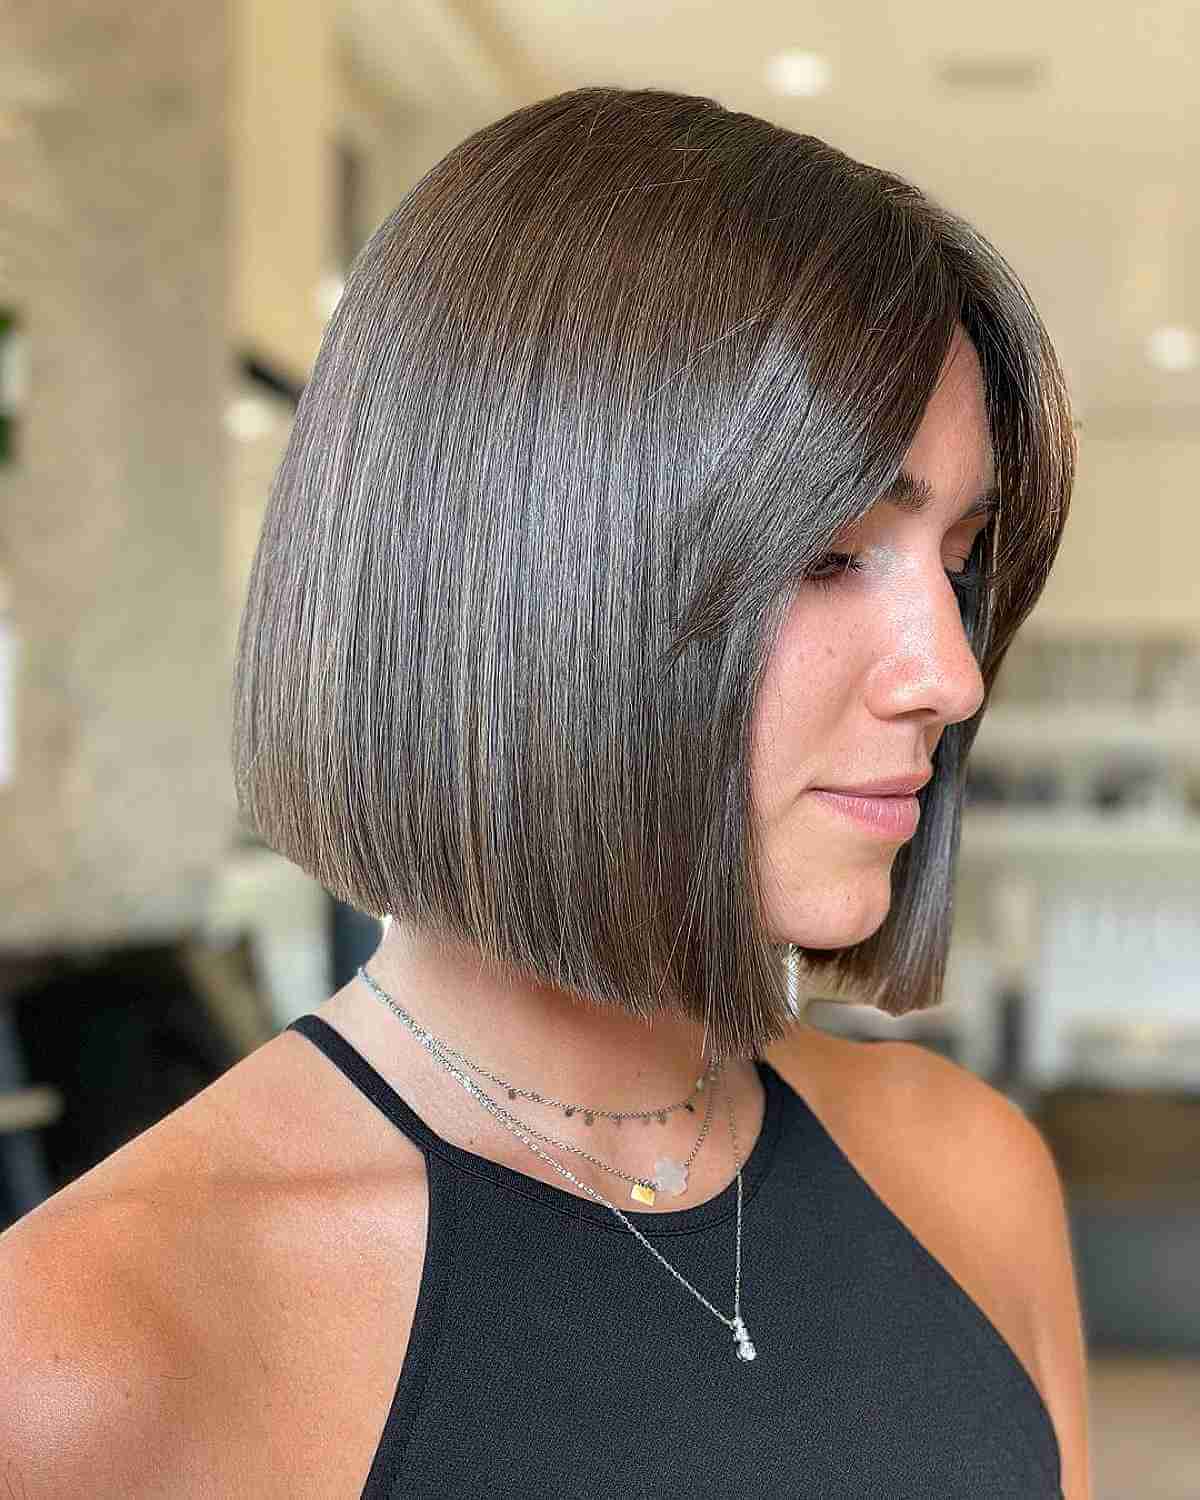 Straight Bob Hairstyle with Middle Part Bangs